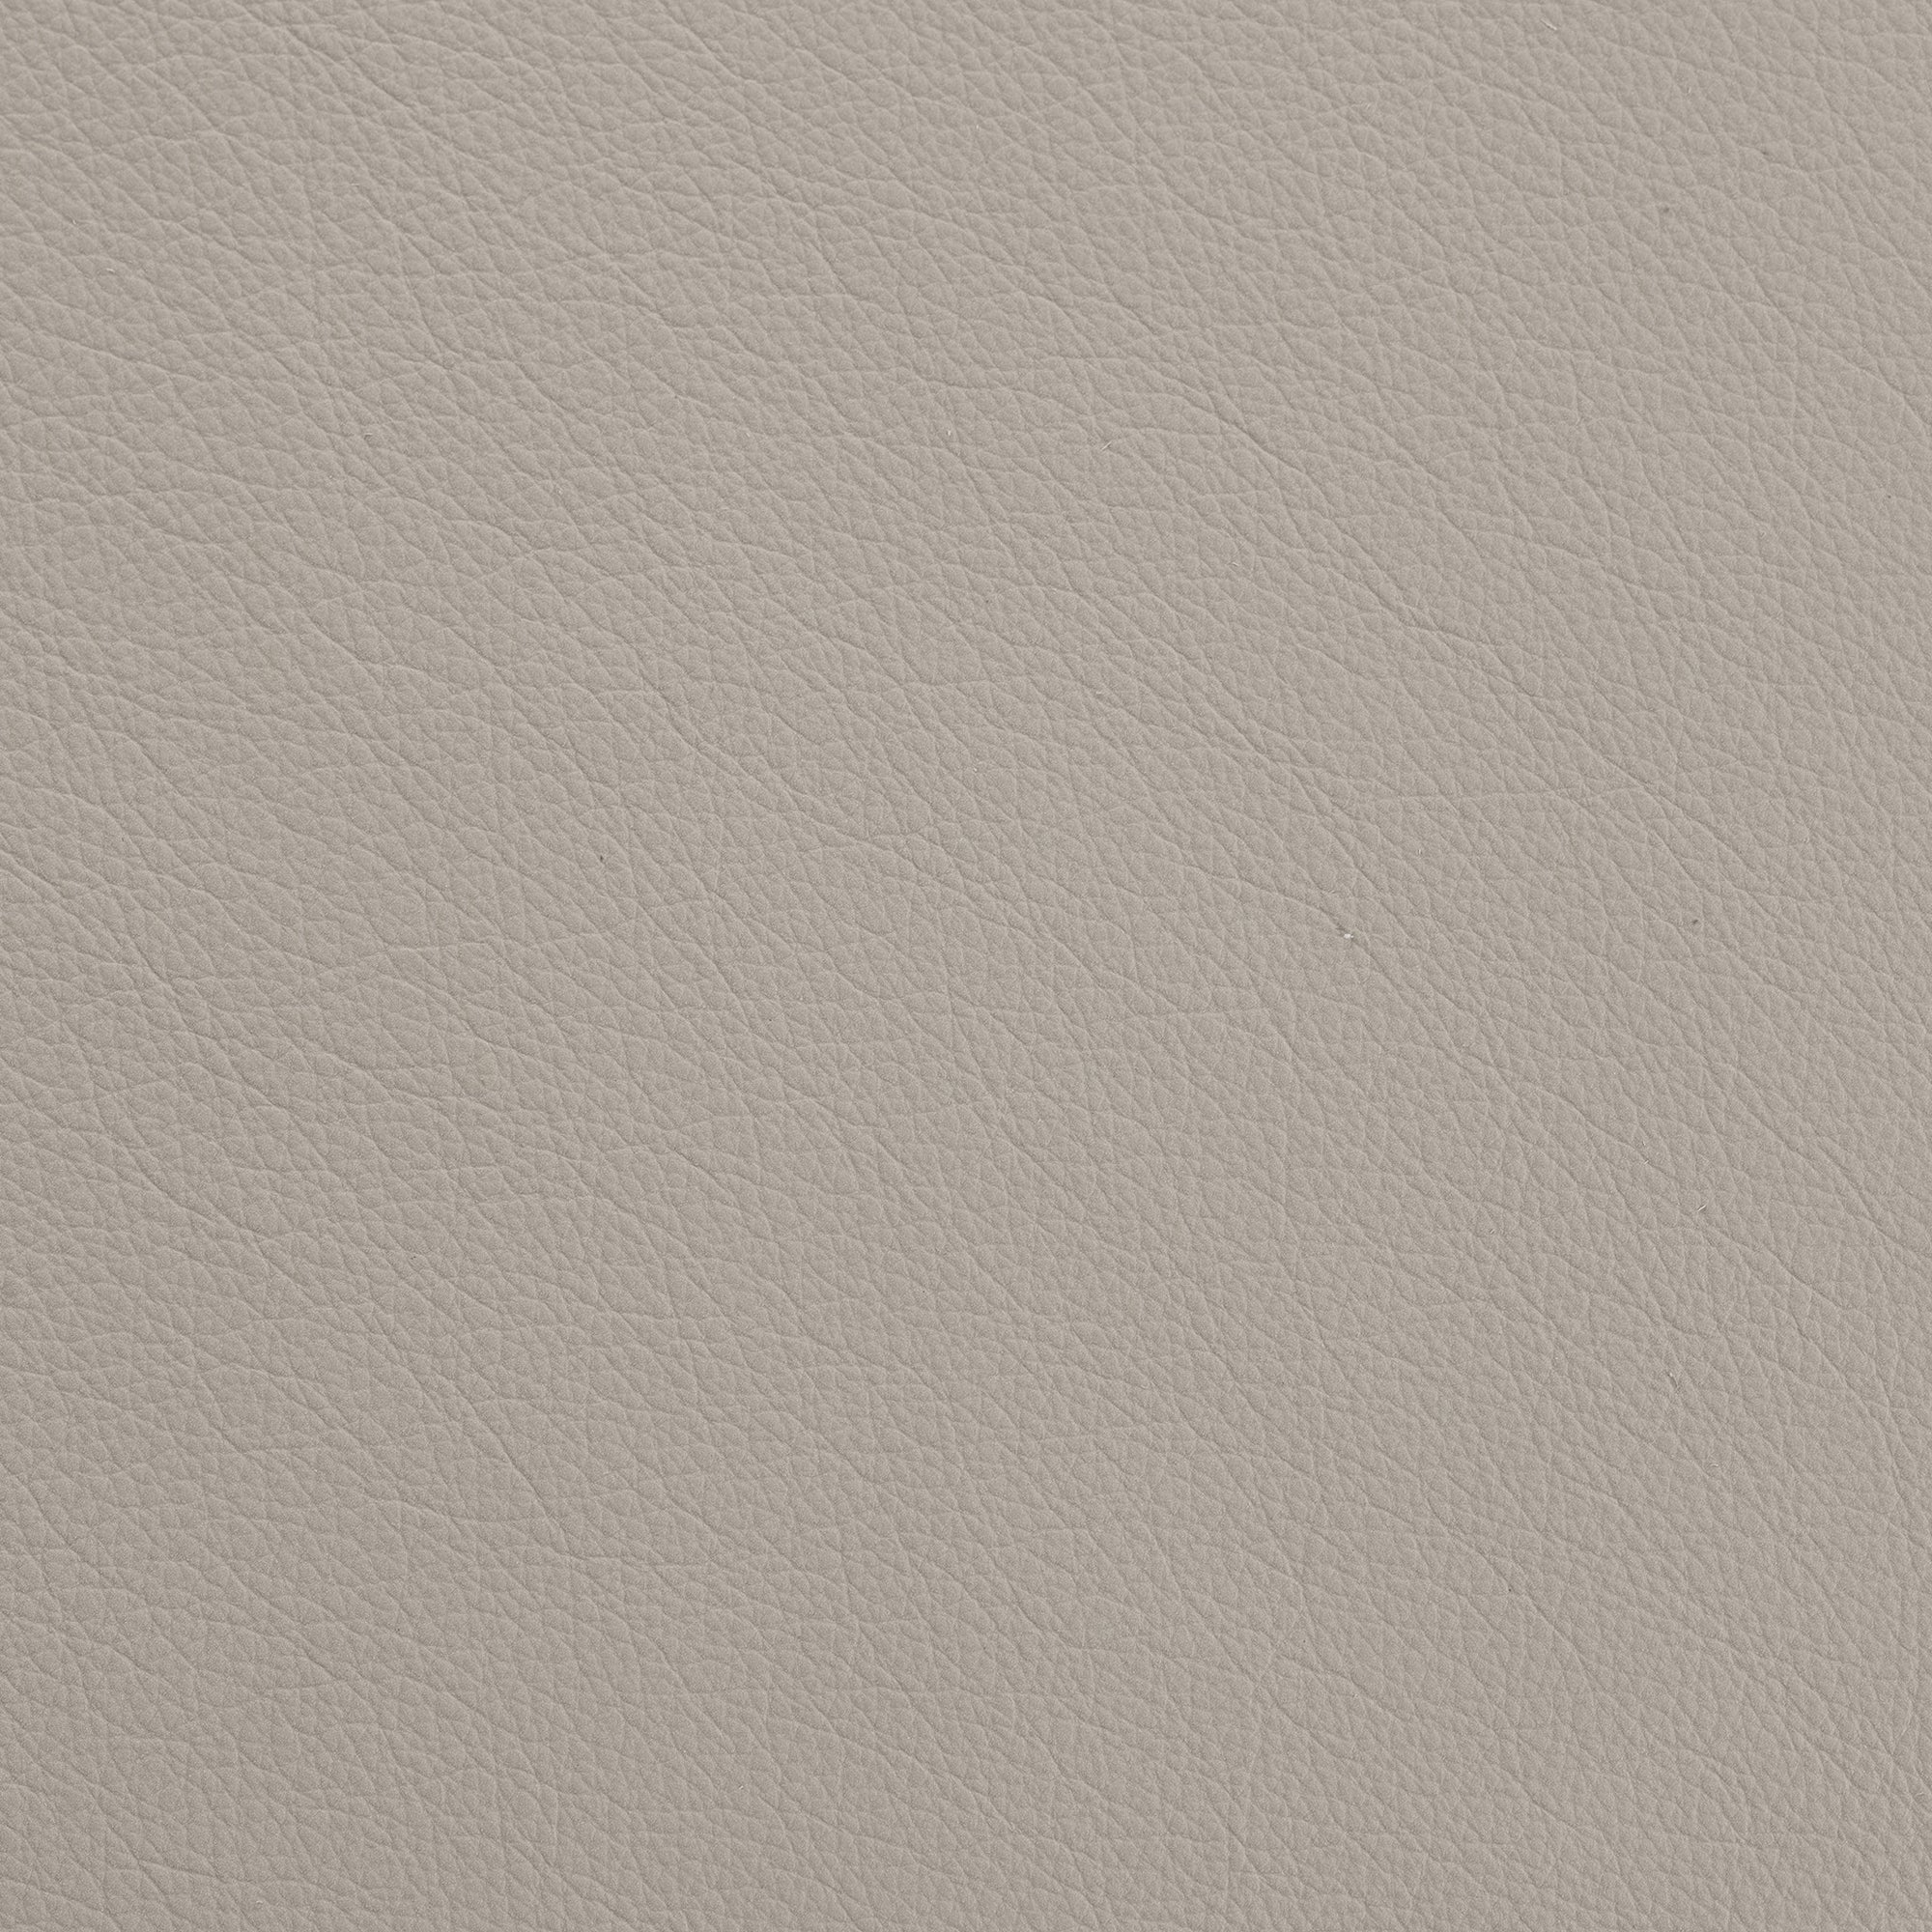 Oyster Nubuck Leather -  Swatch